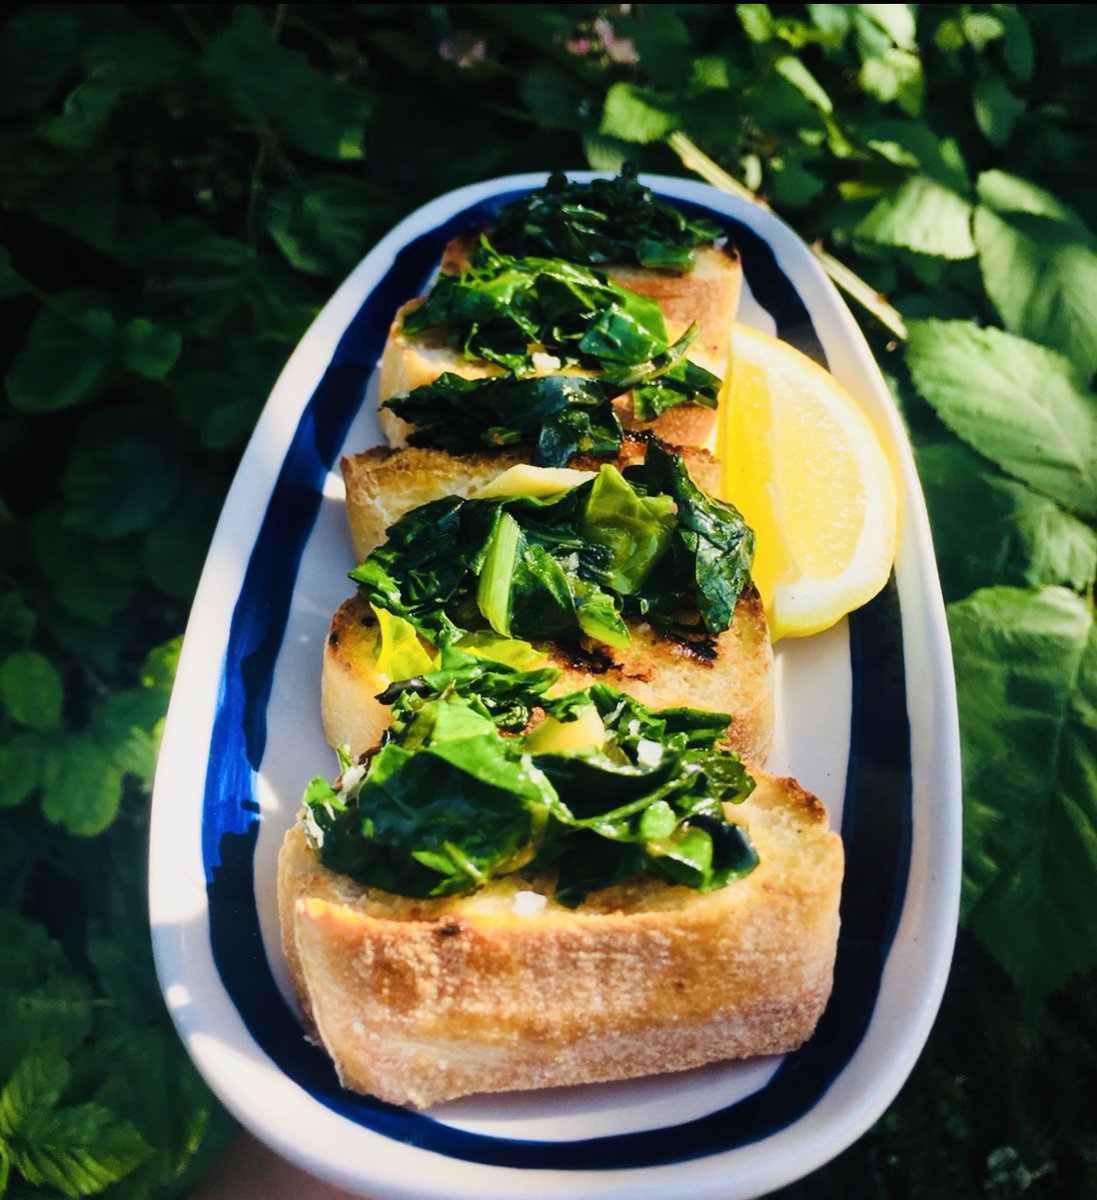 Homemade Crostini with Seasonal Greens , inspired by my green veg project, the lovely veggies from @cultivateoxford and the @cookpad_uk Italian theme. Drizzled with delicious @ogglio olive oil and fresh garlic - very simple but perfect for the garden! #vegrecipes #seasonalgreens